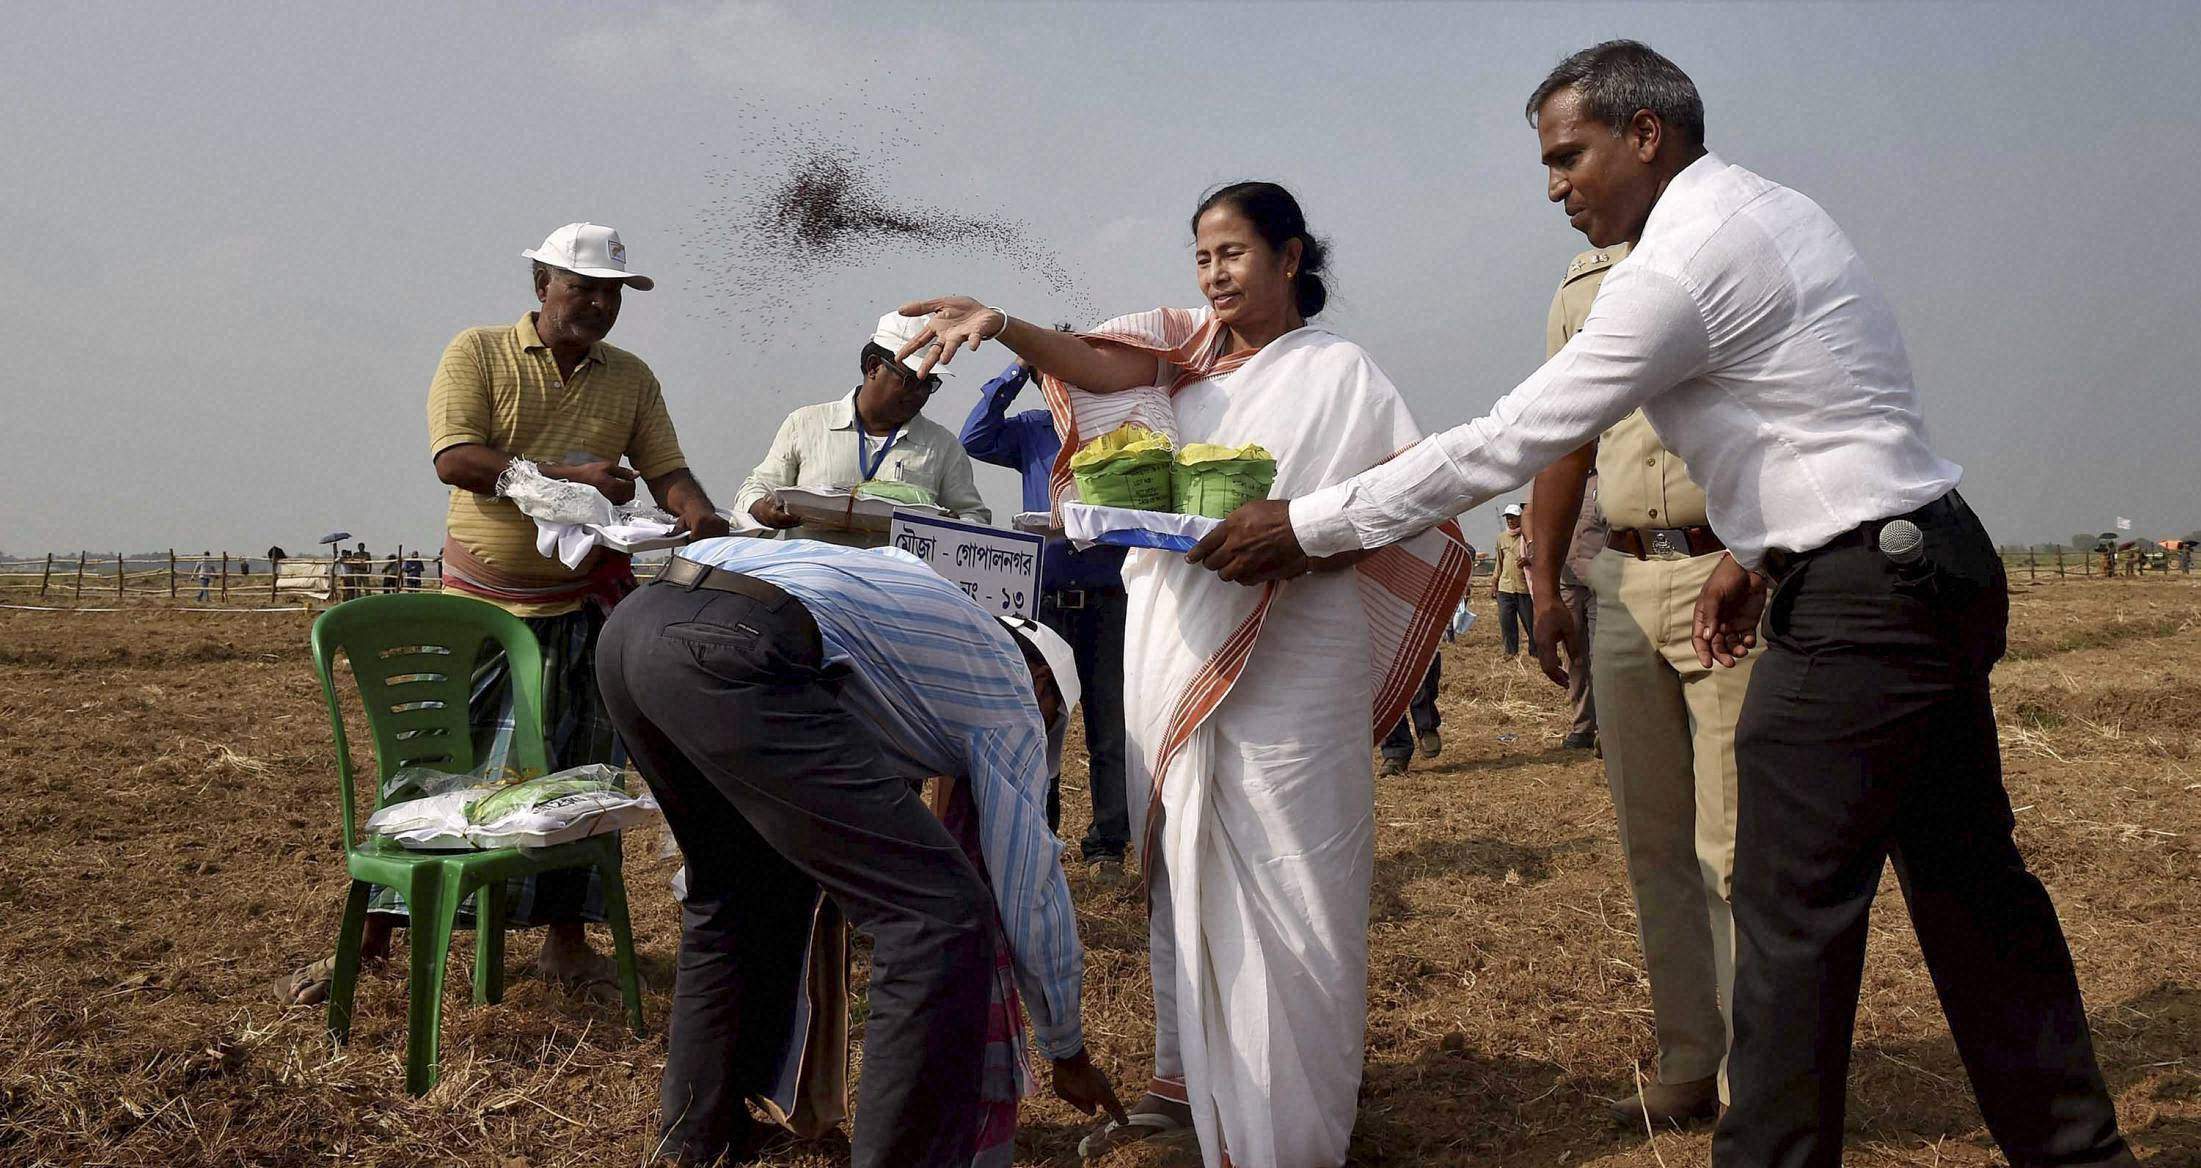 West Bengal Chief Minister Mamata Banerjee sowing master seeds with farmers at the land handed over to the farmers, in Singur. | PTI File Photo